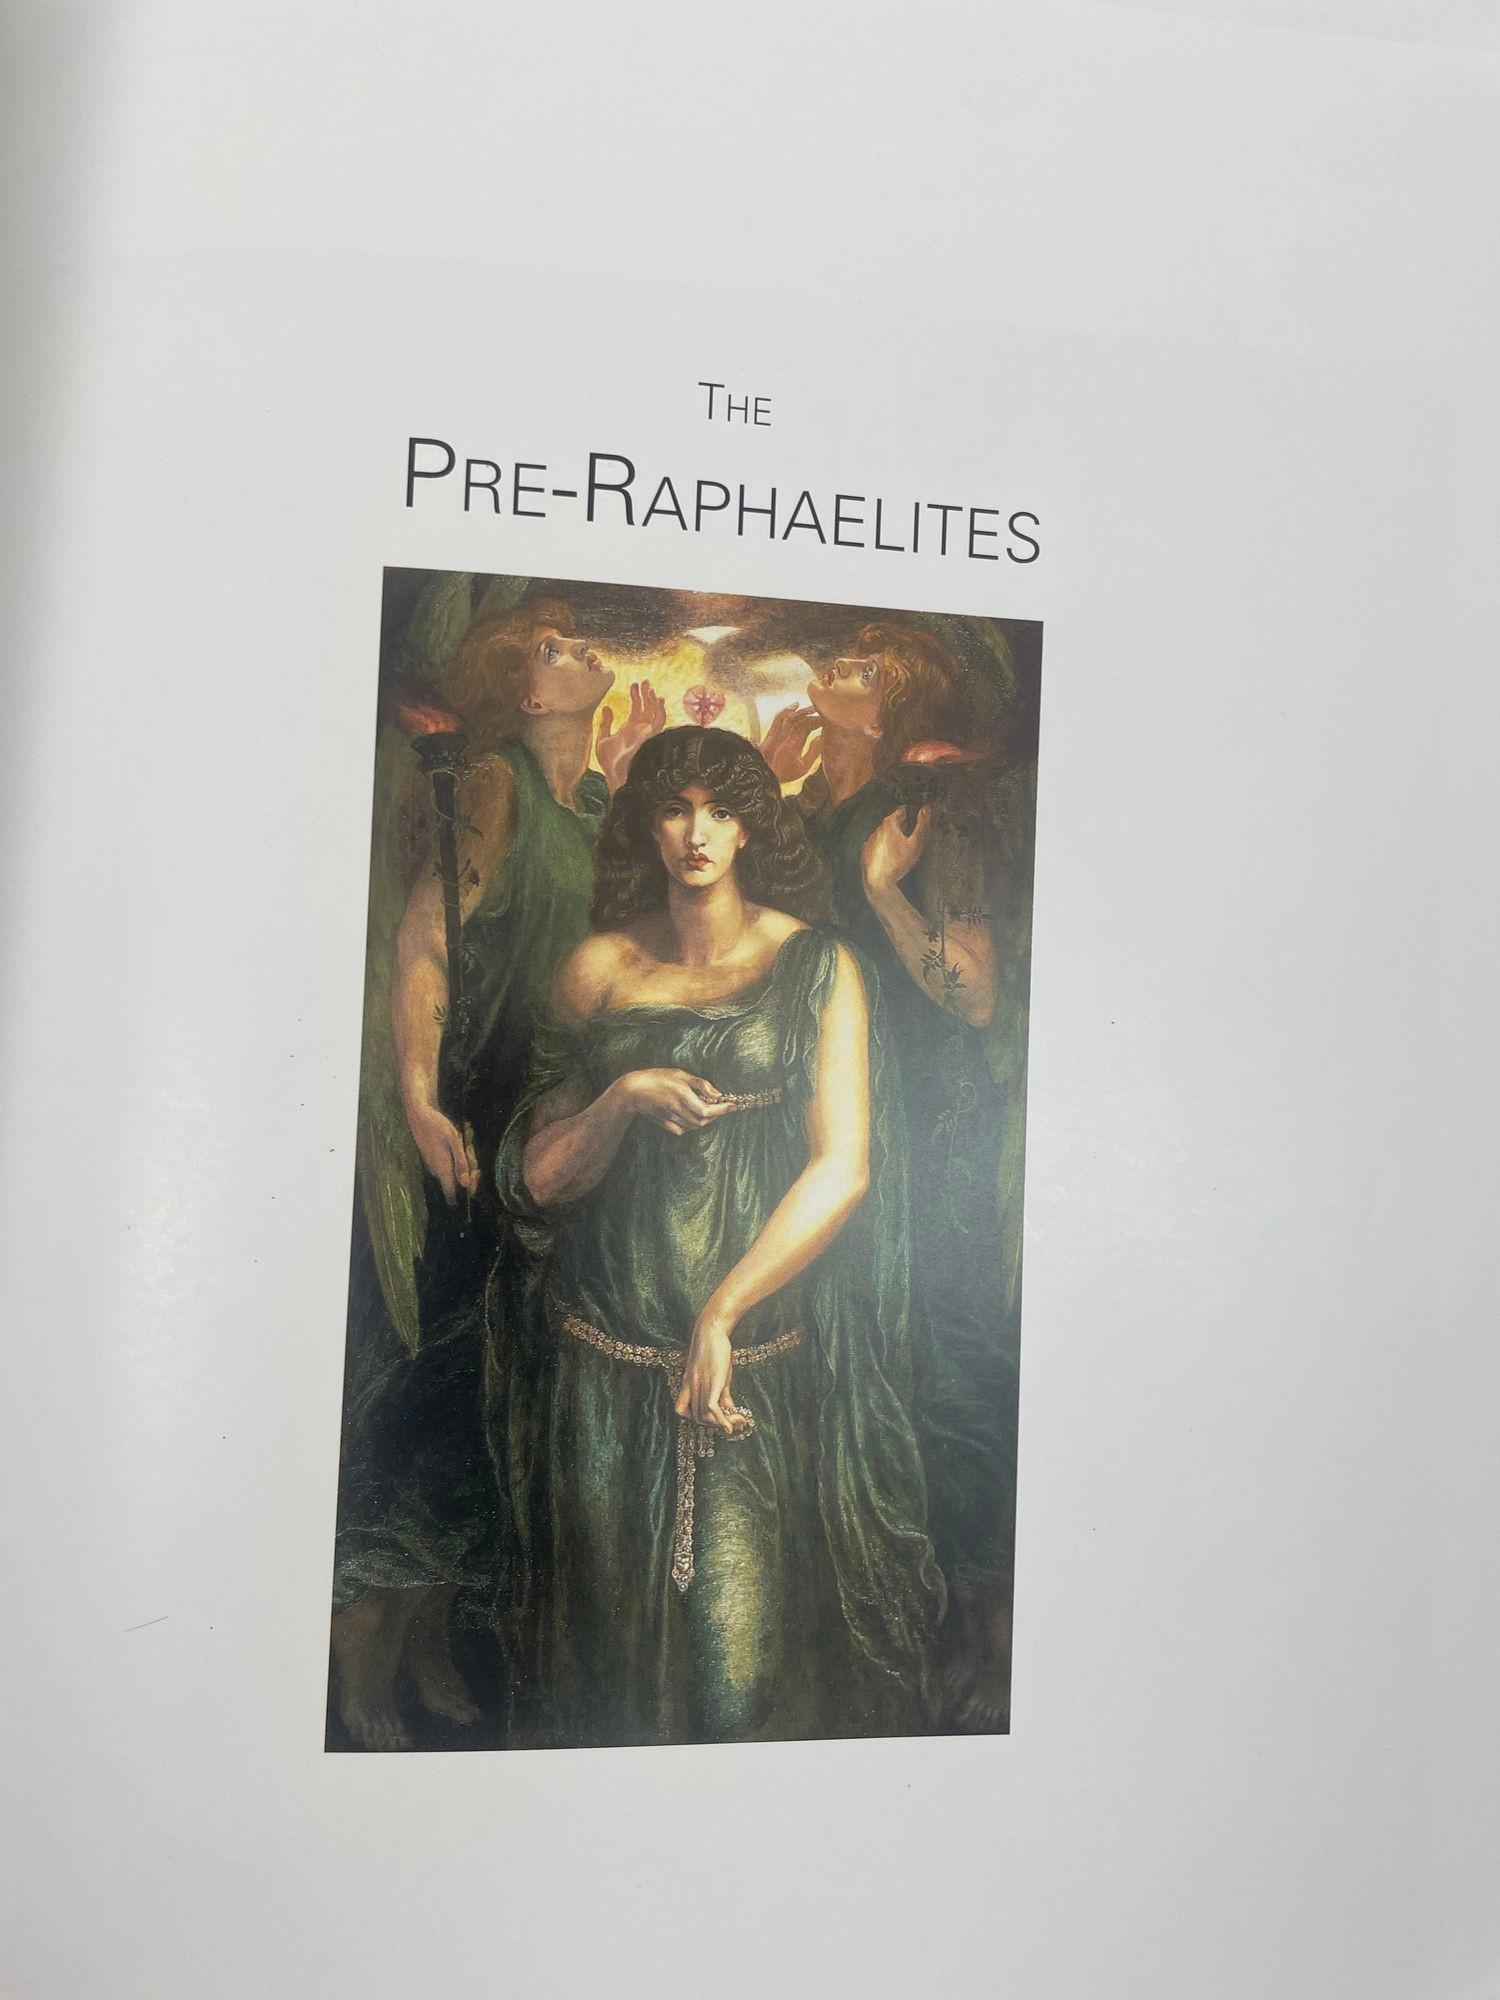 Paper The Pre-Raphaelites by Sandra Forty Hardcover Book 1st Ed. 1997 For Sale